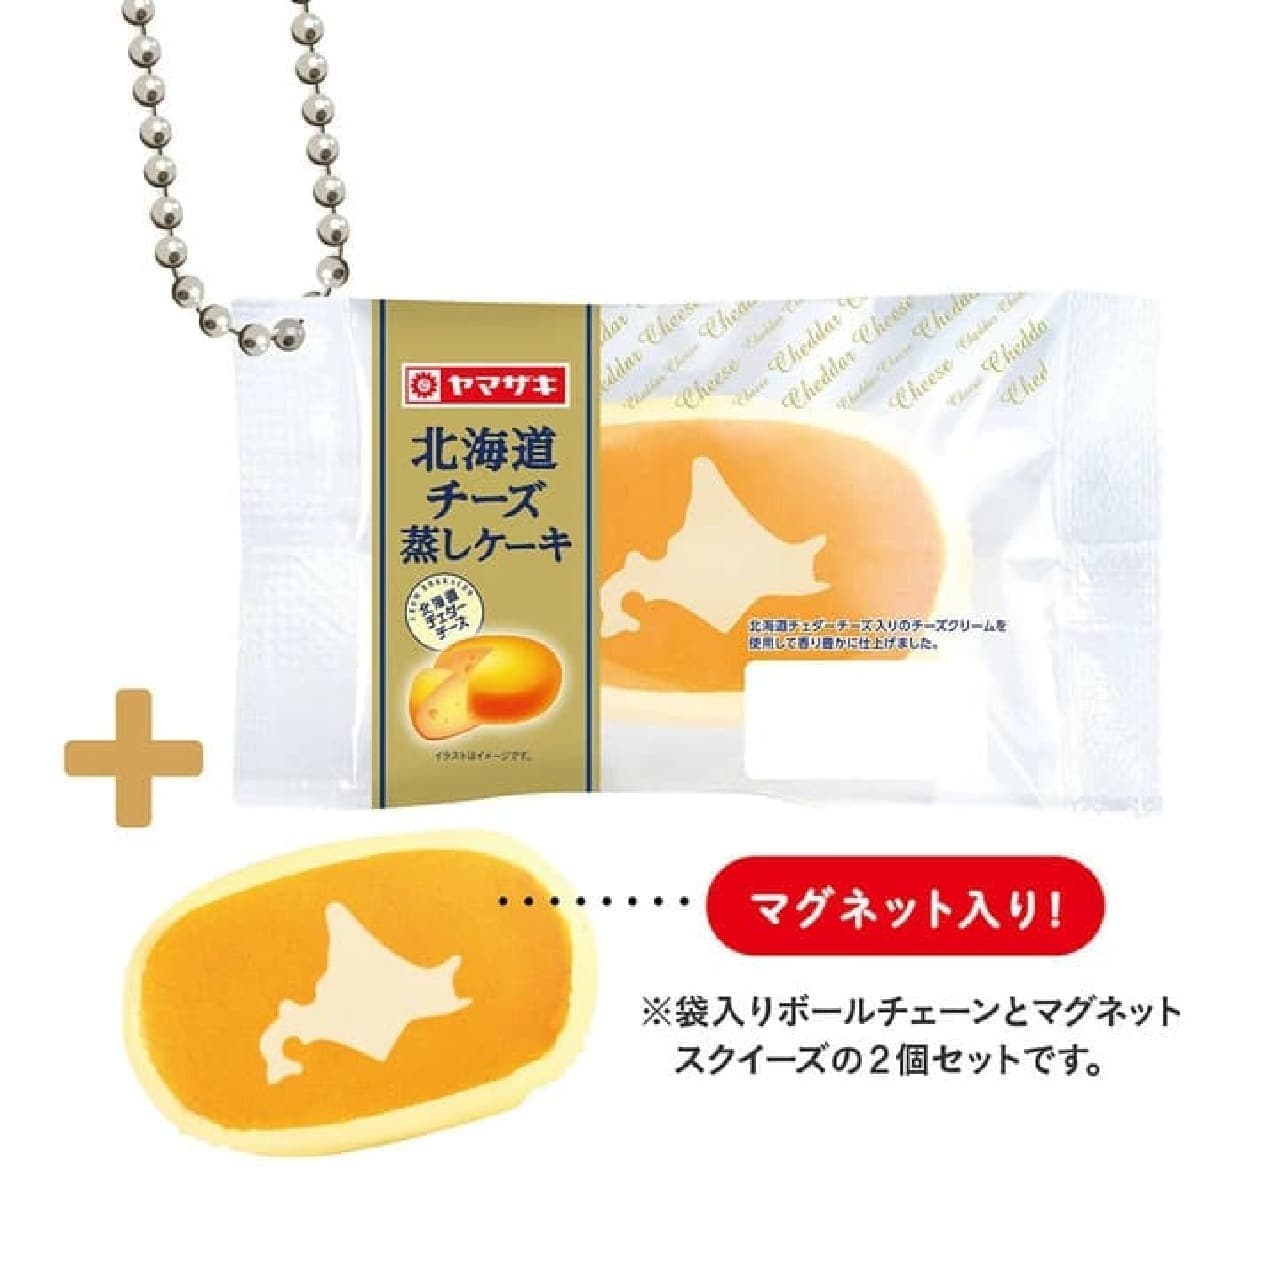 Introducing "Yamazaki Miniature Collection" --For fluffy squeeze such as Royal Bread Lunch Pack